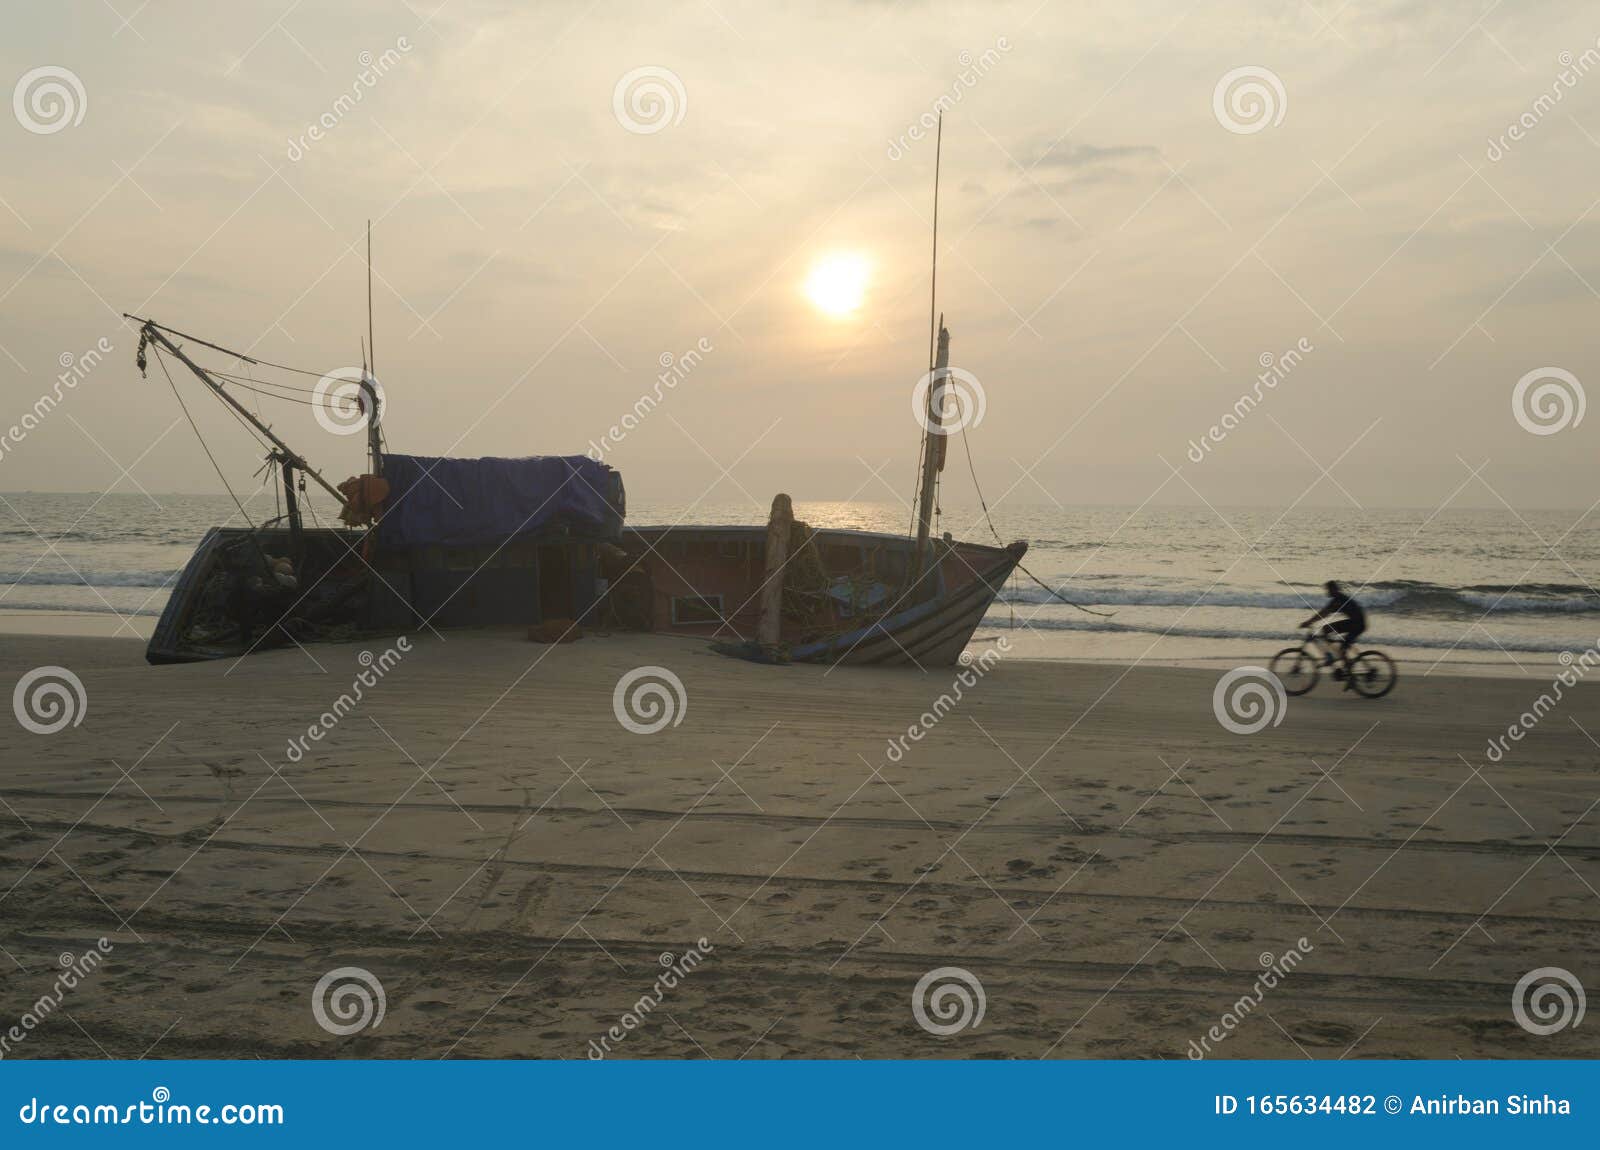 silhouette of a cyclist passing by a ship wreak on sunset beach